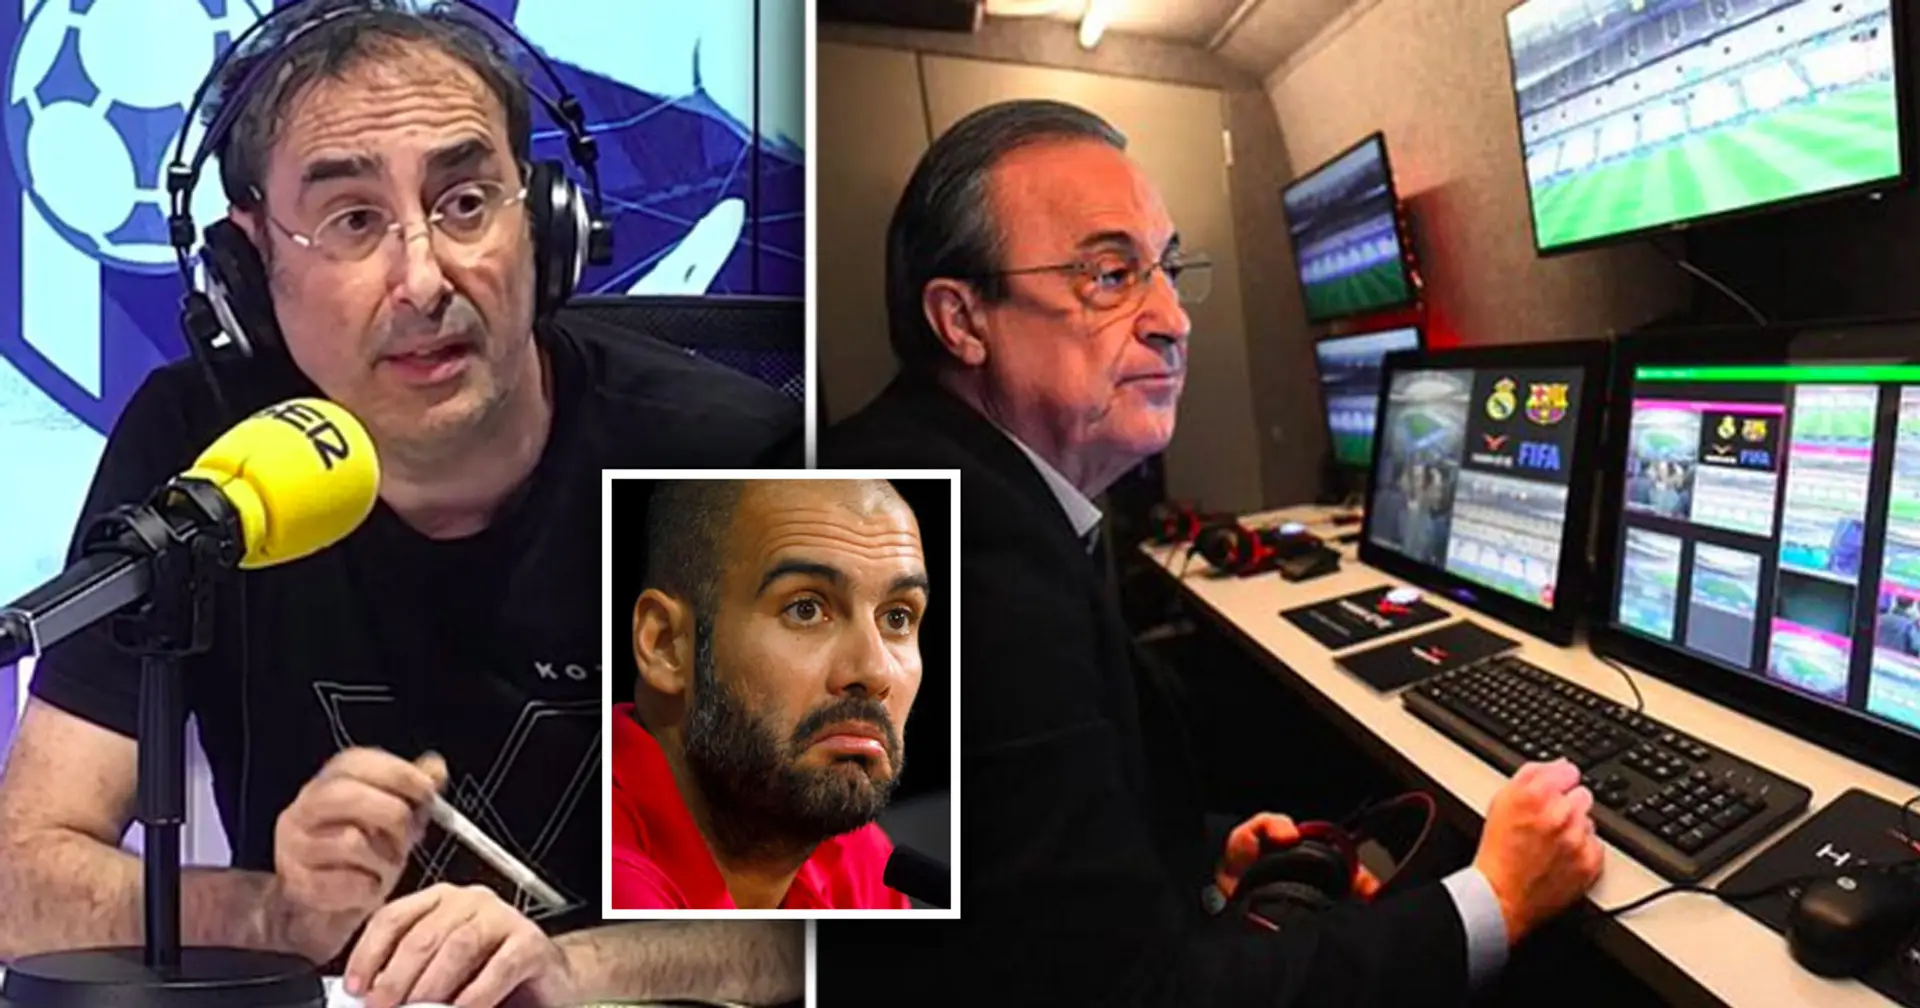 'He asked me to referee them 'the same way as Barca'': Ex-La Liga referee tells shocking story about Florentino Perez